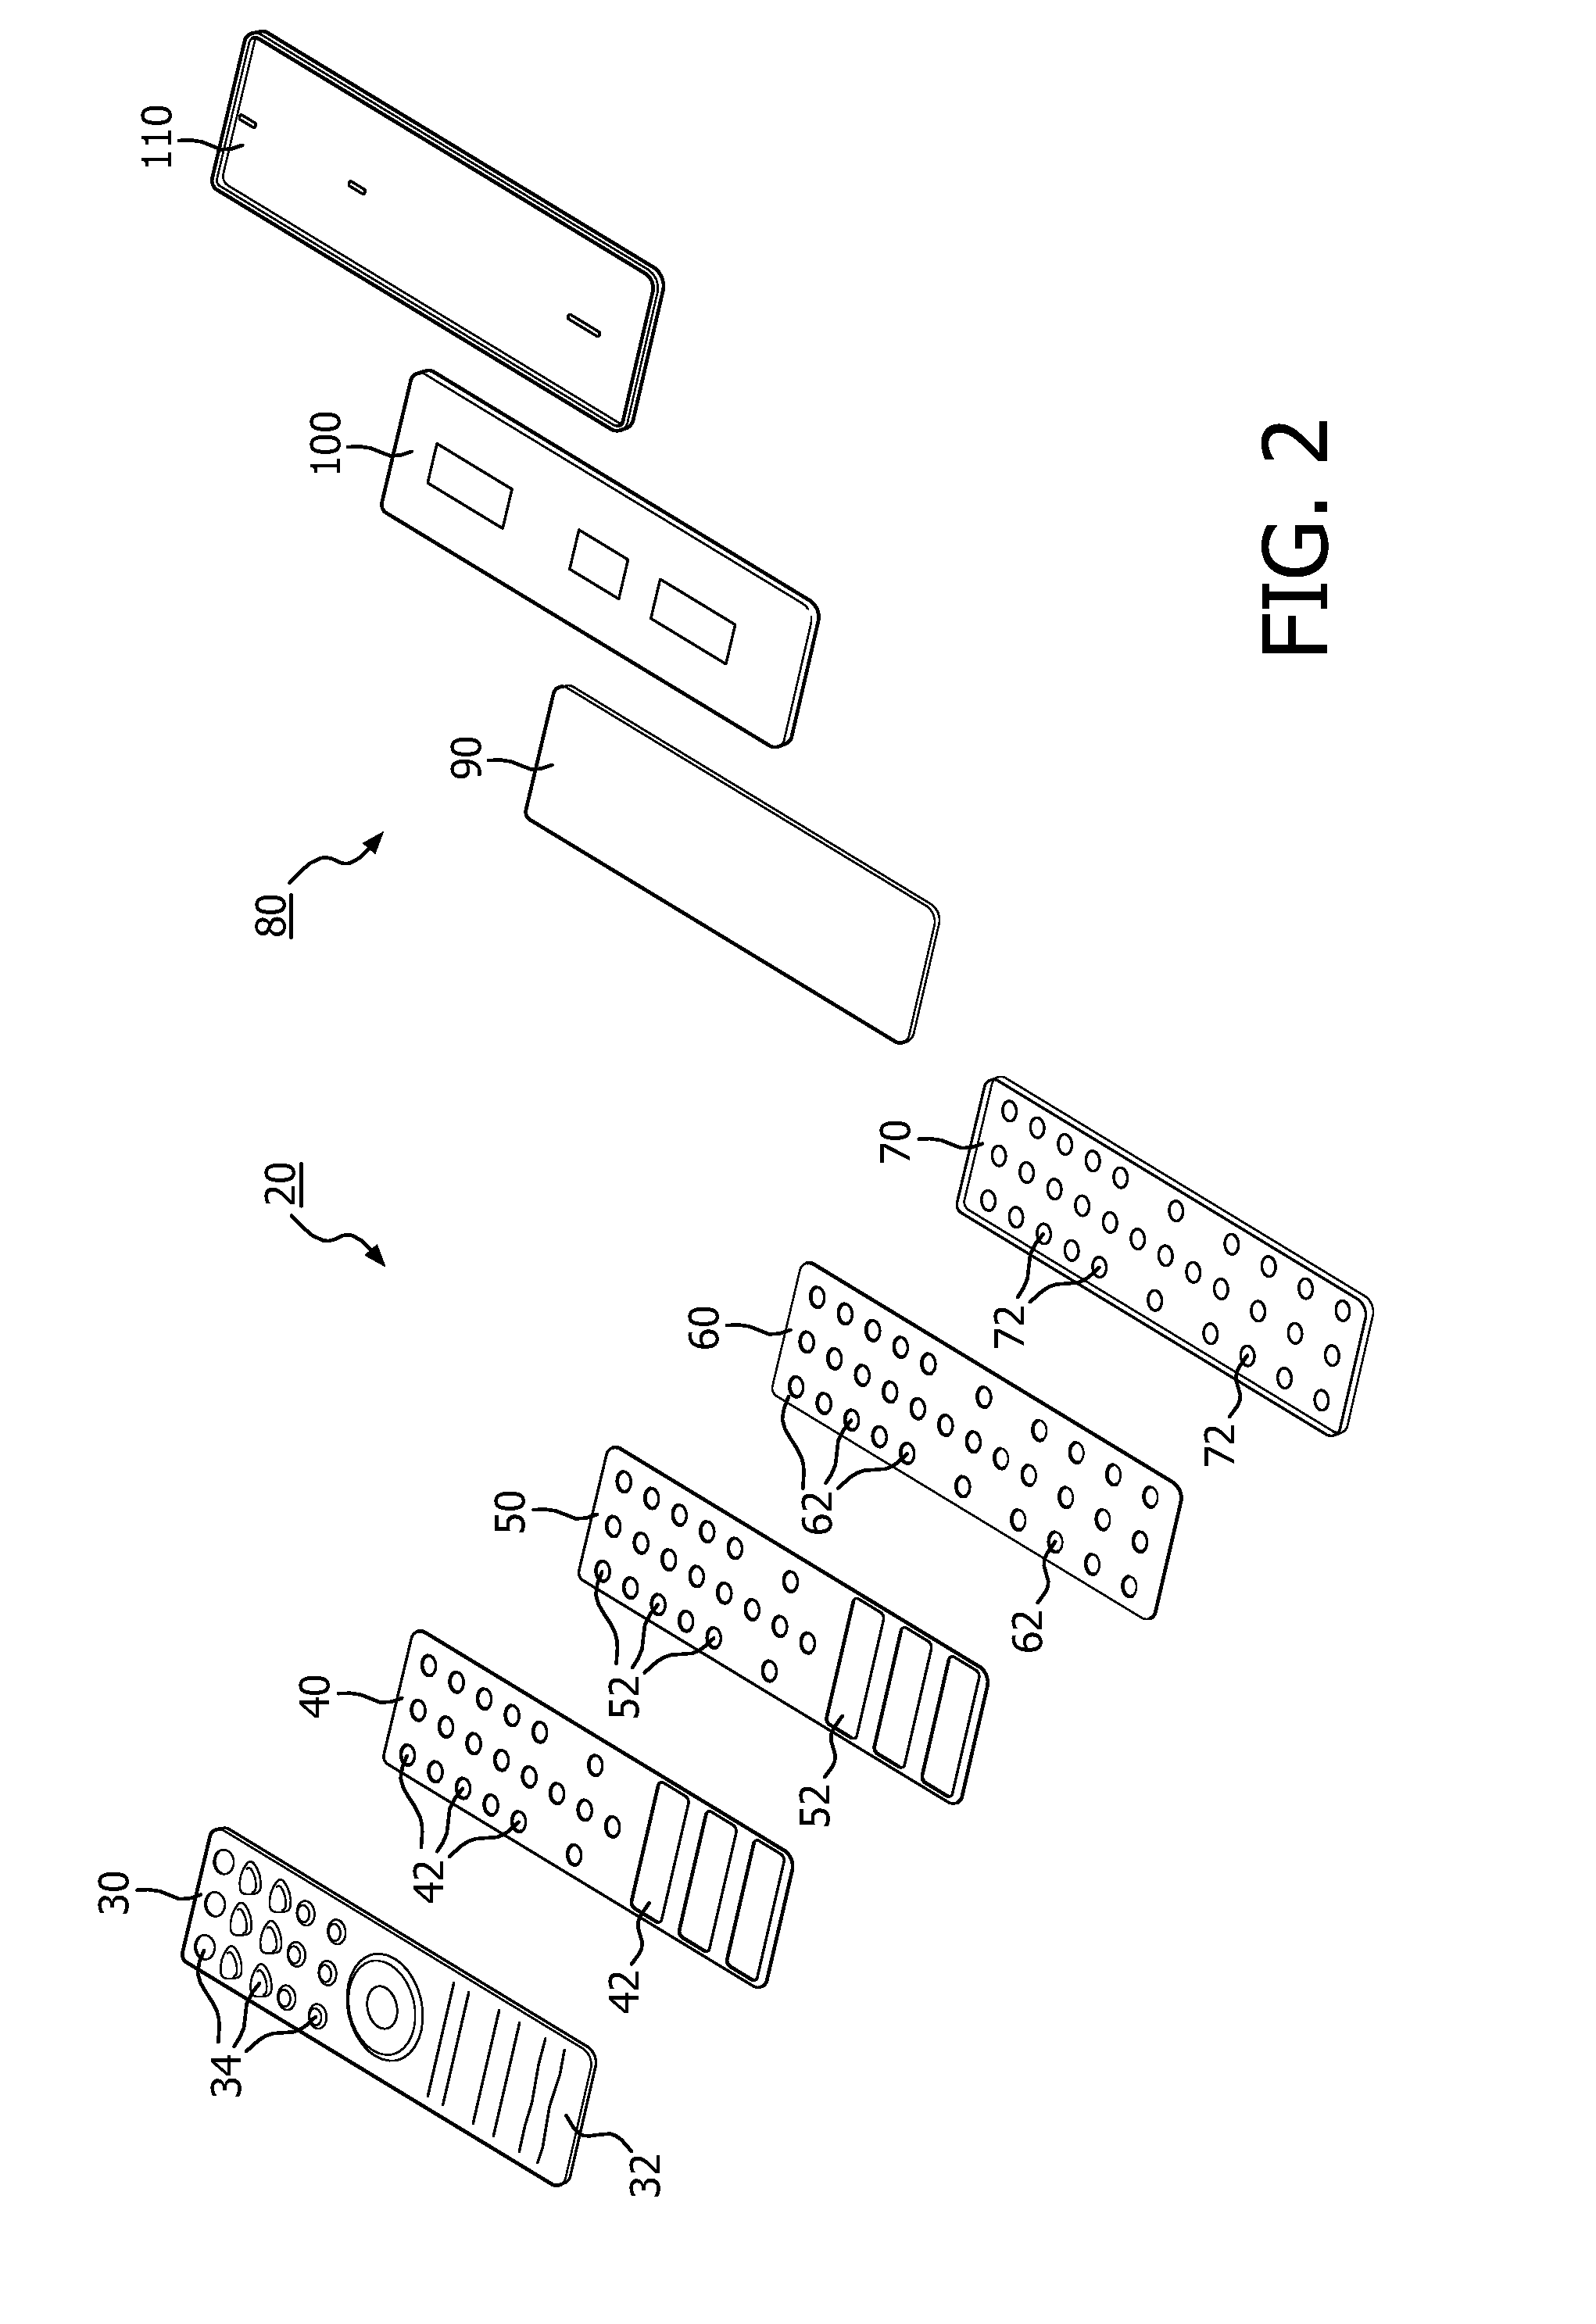 Seamless faceplate assembly for keypad device